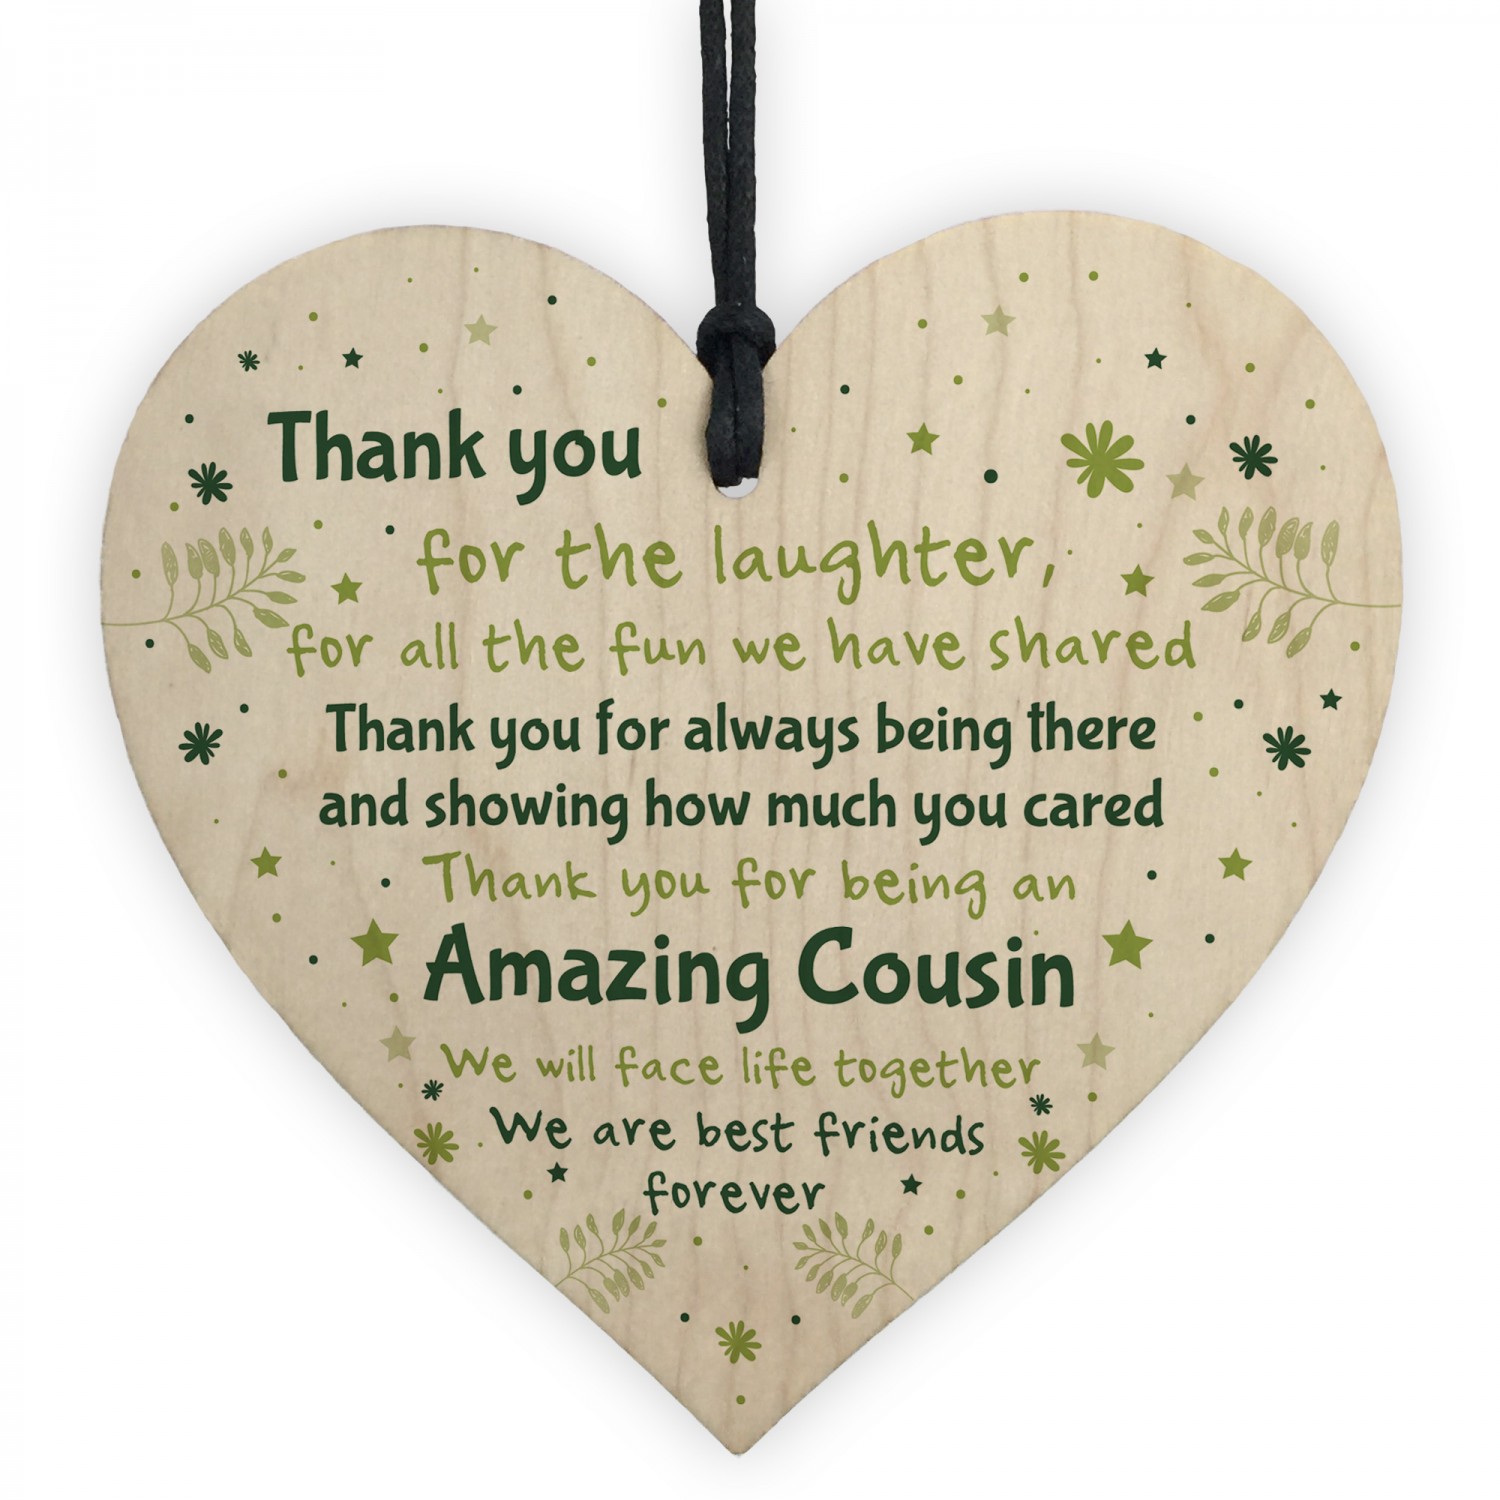 RED OCEAN Got The Best Cousins Wooden Heart Family Plaque Thank You Gift Birthday Present